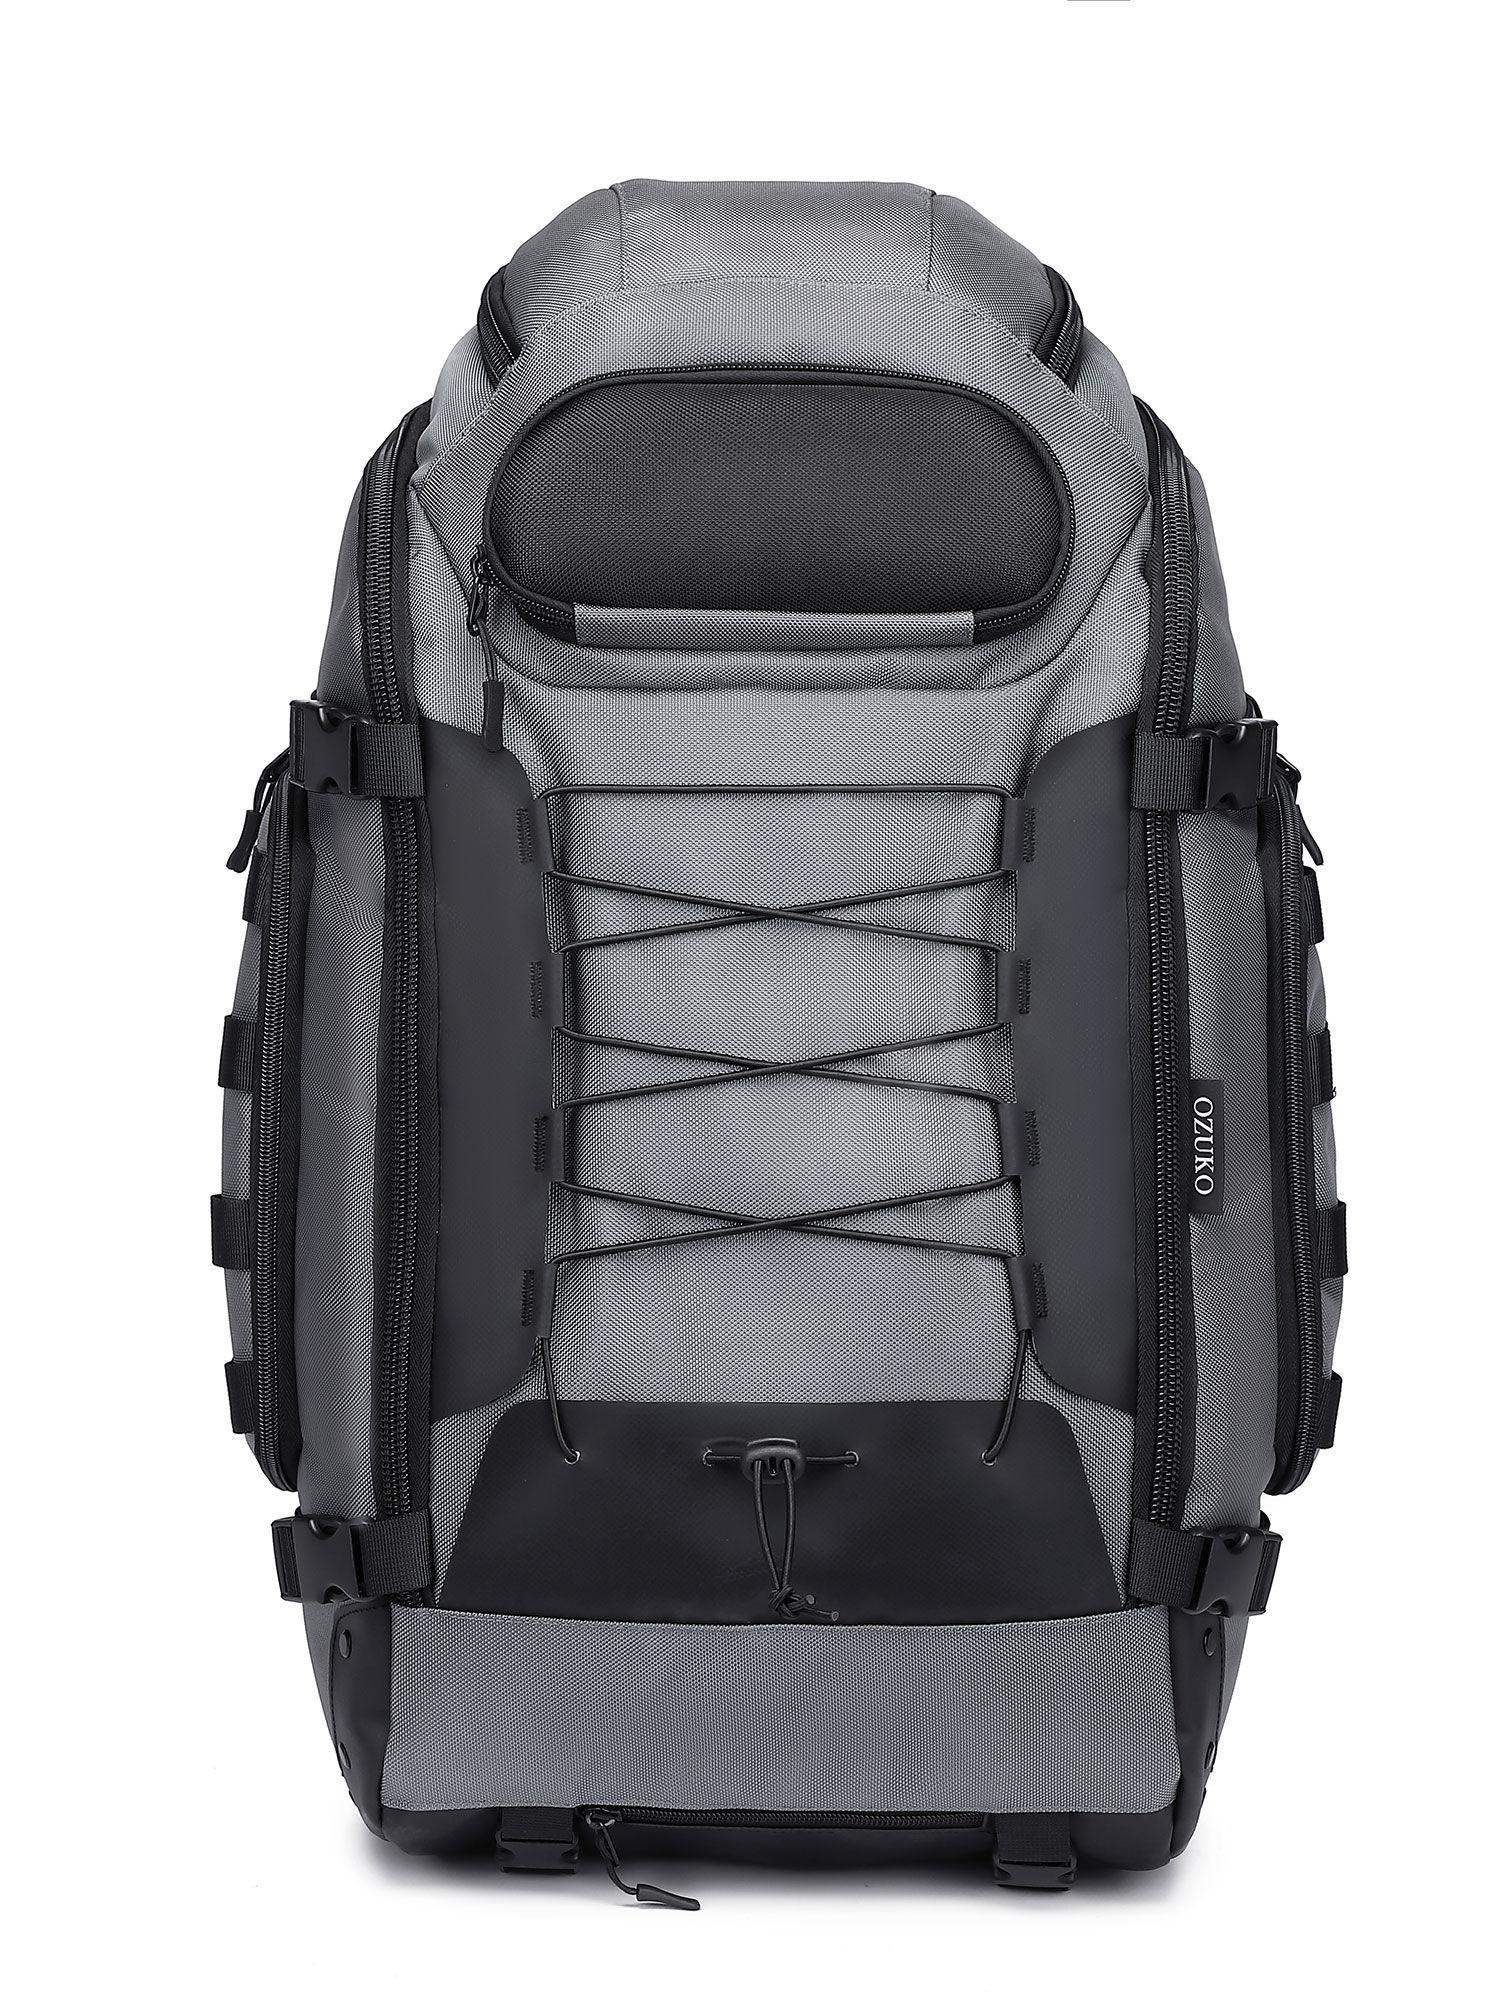 9390 grey soft one size backpack